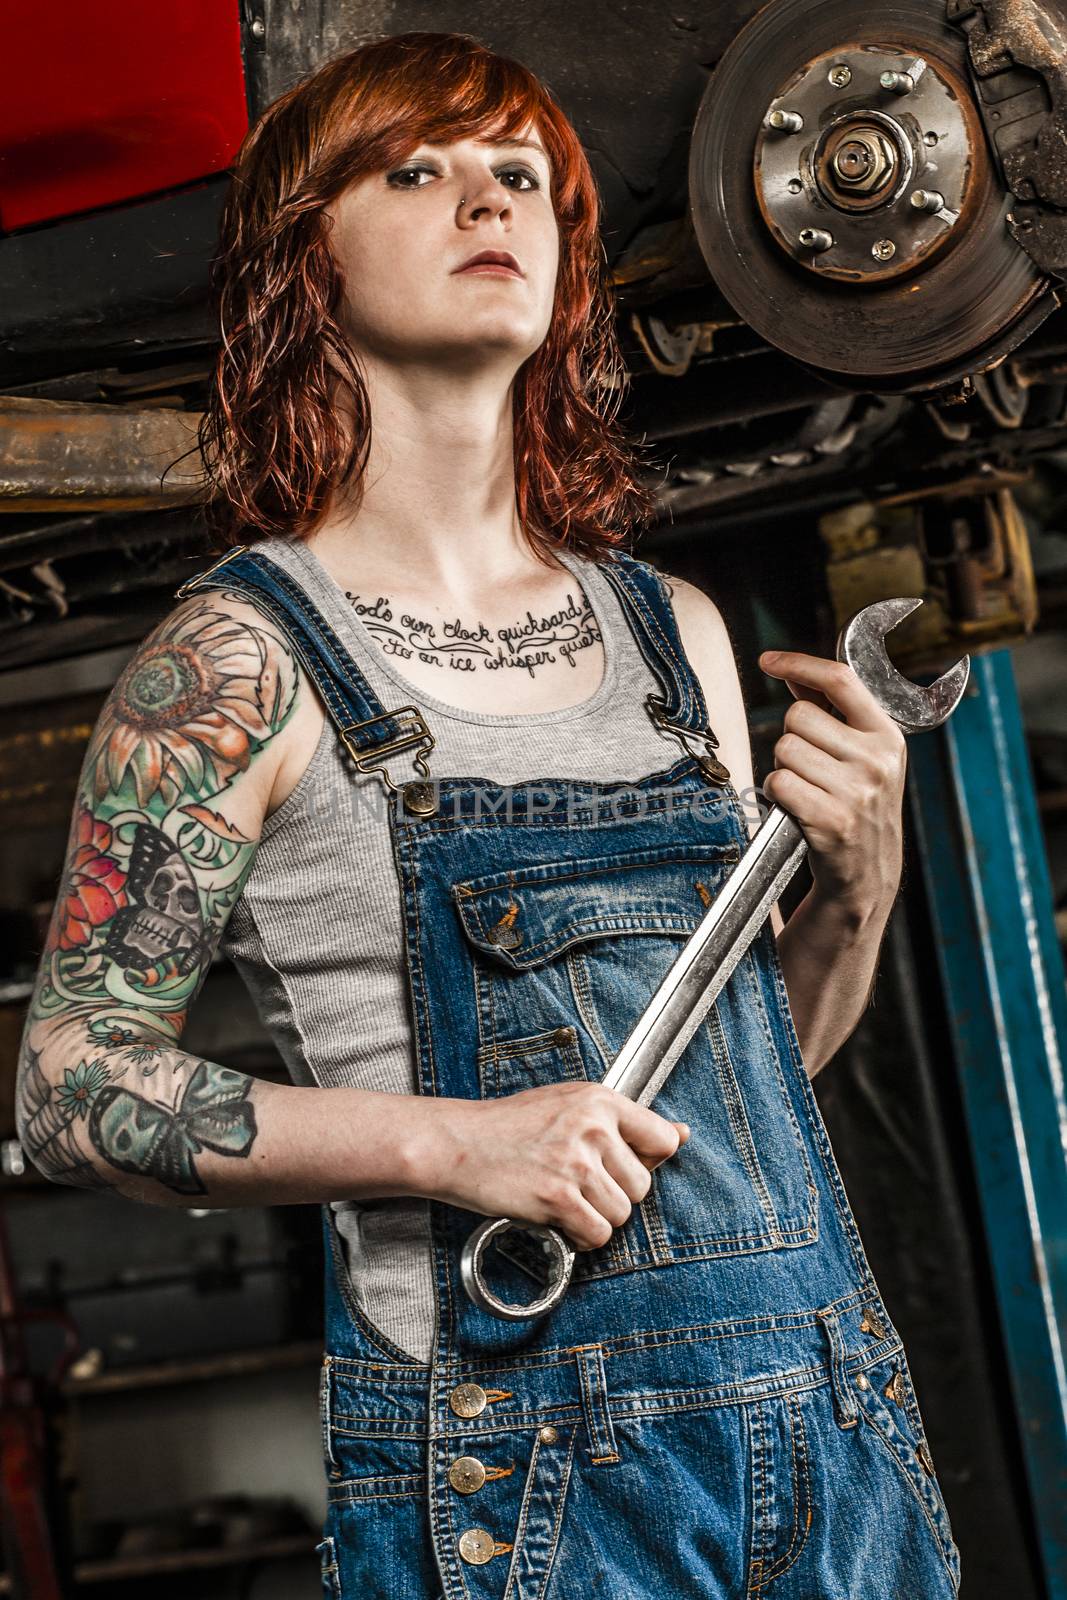 Photo of a young beautiful redhead mechanic with tattoos and wearing overalls fixing the brakes on a car. Attached property release is for arm tattoos.